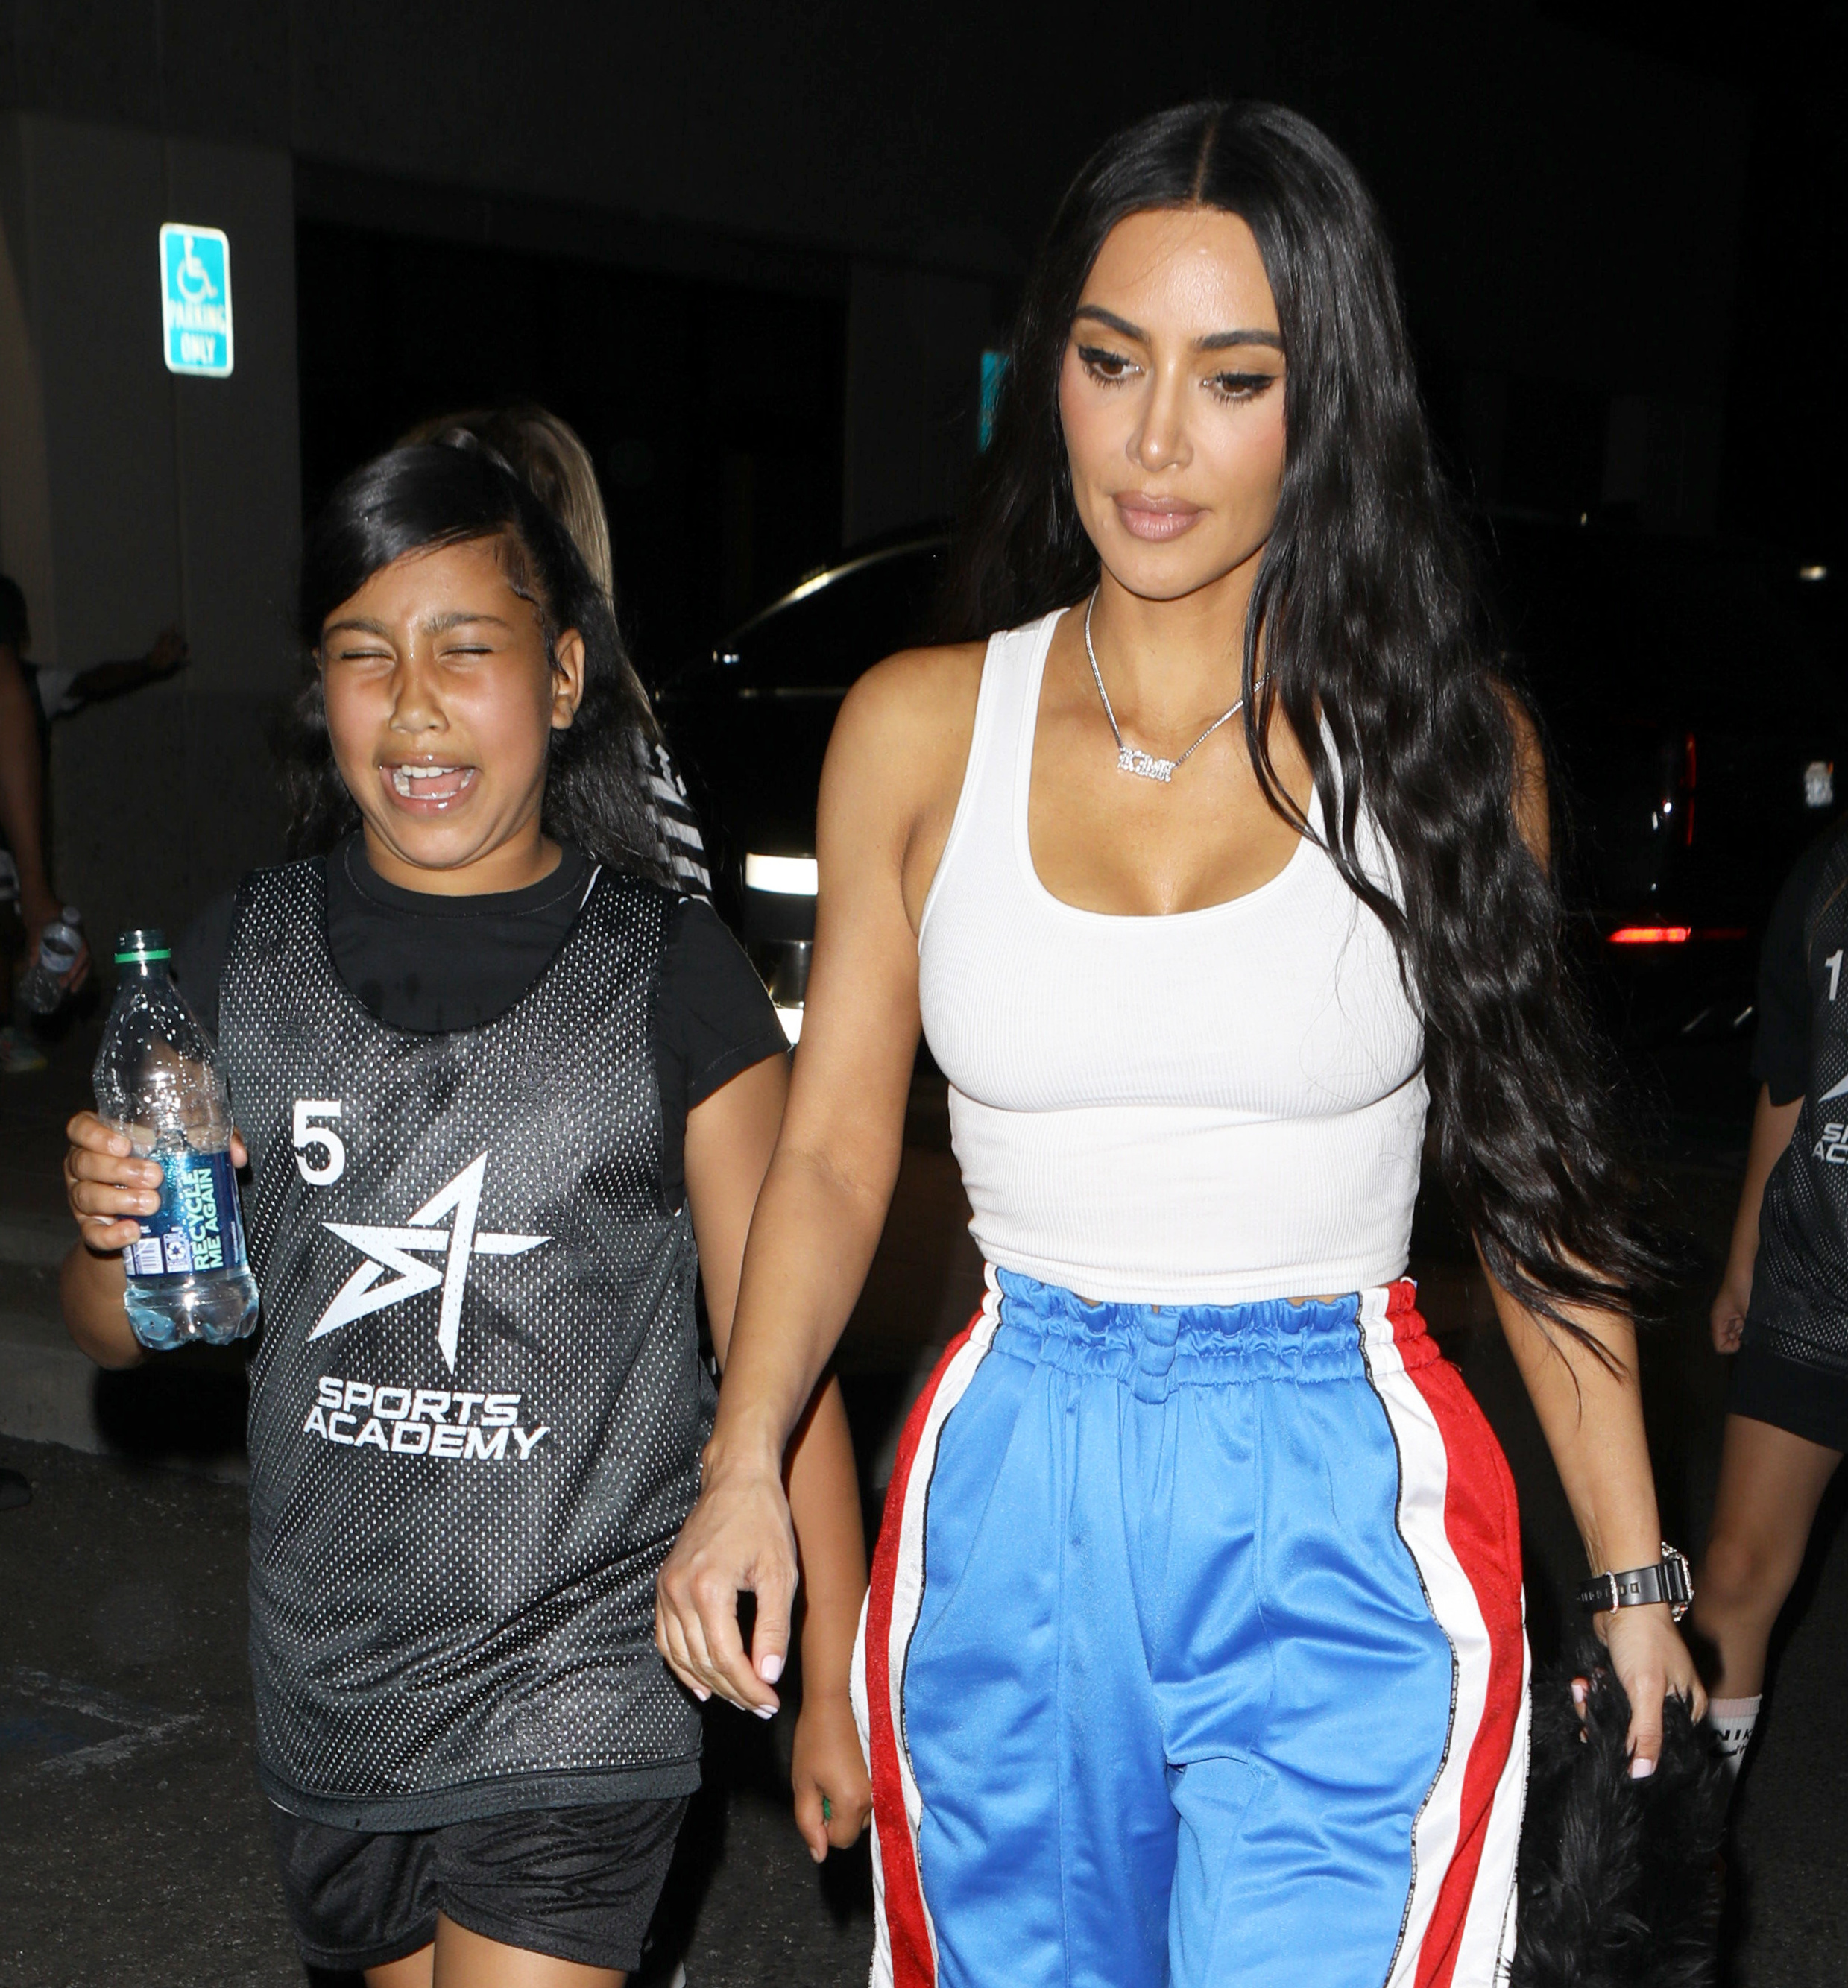 North West left her basketball game with Kim looking just miserable